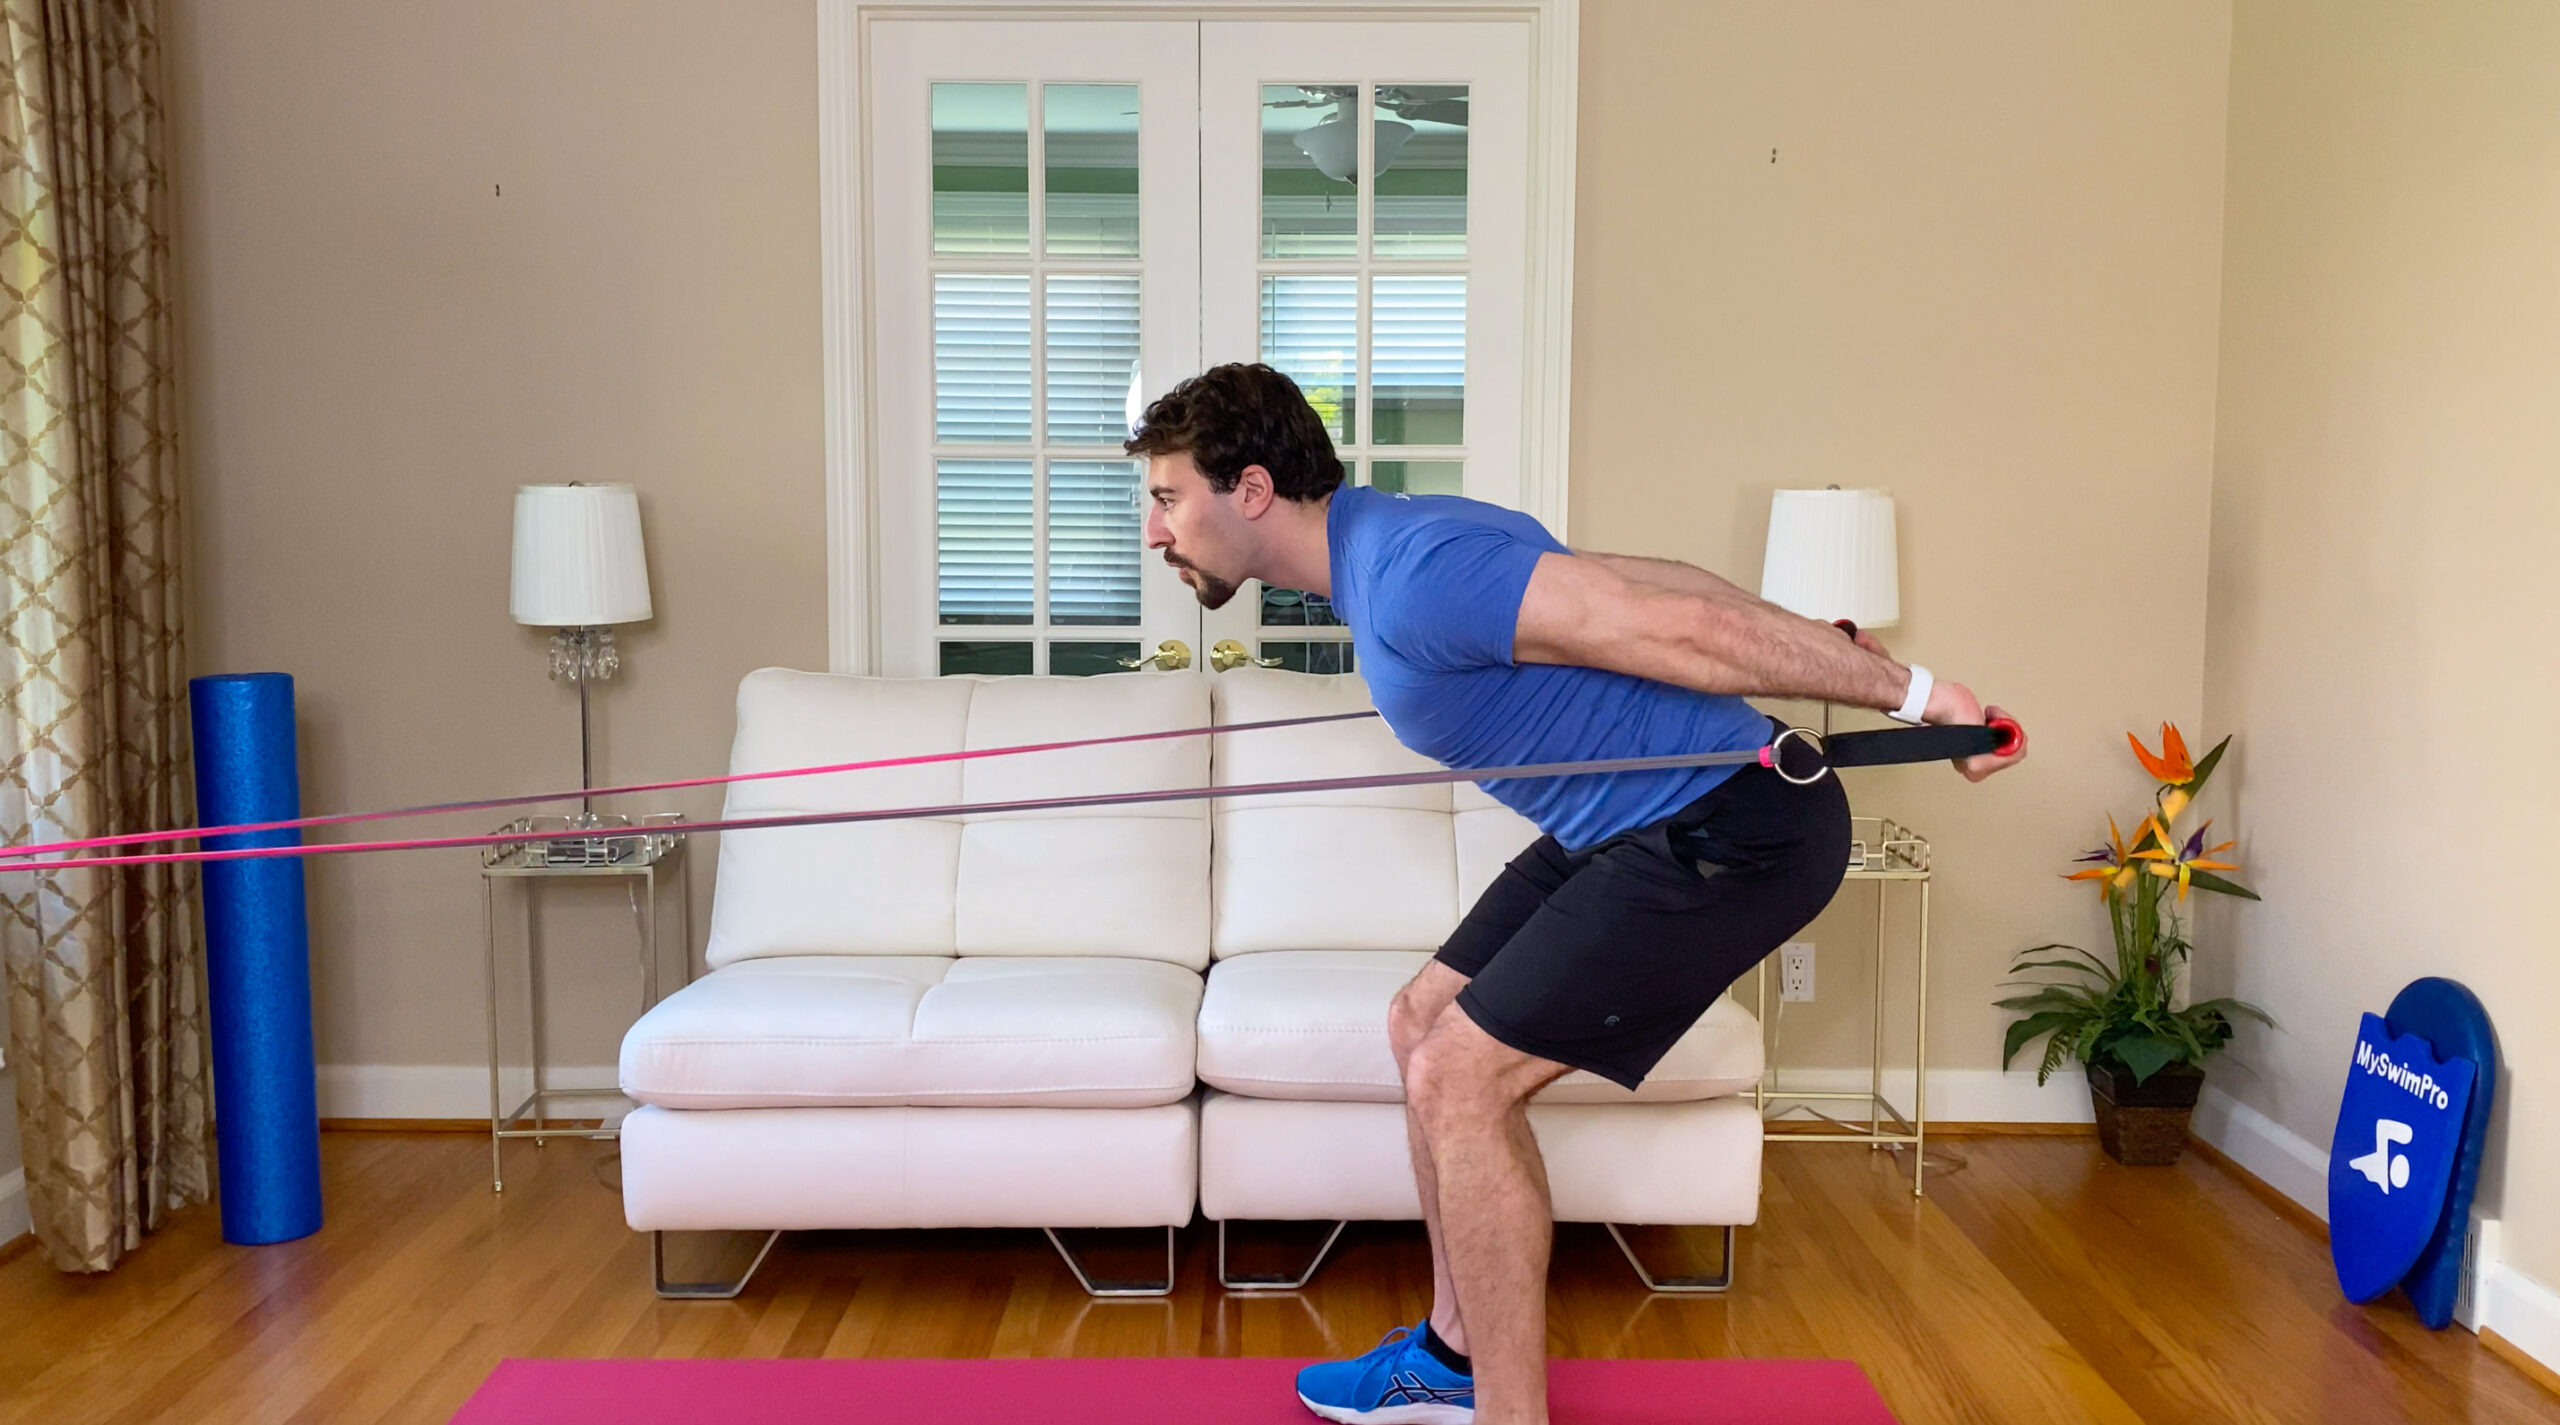 15 Resistance Band Exercises to Improve Swimming Strength, Power